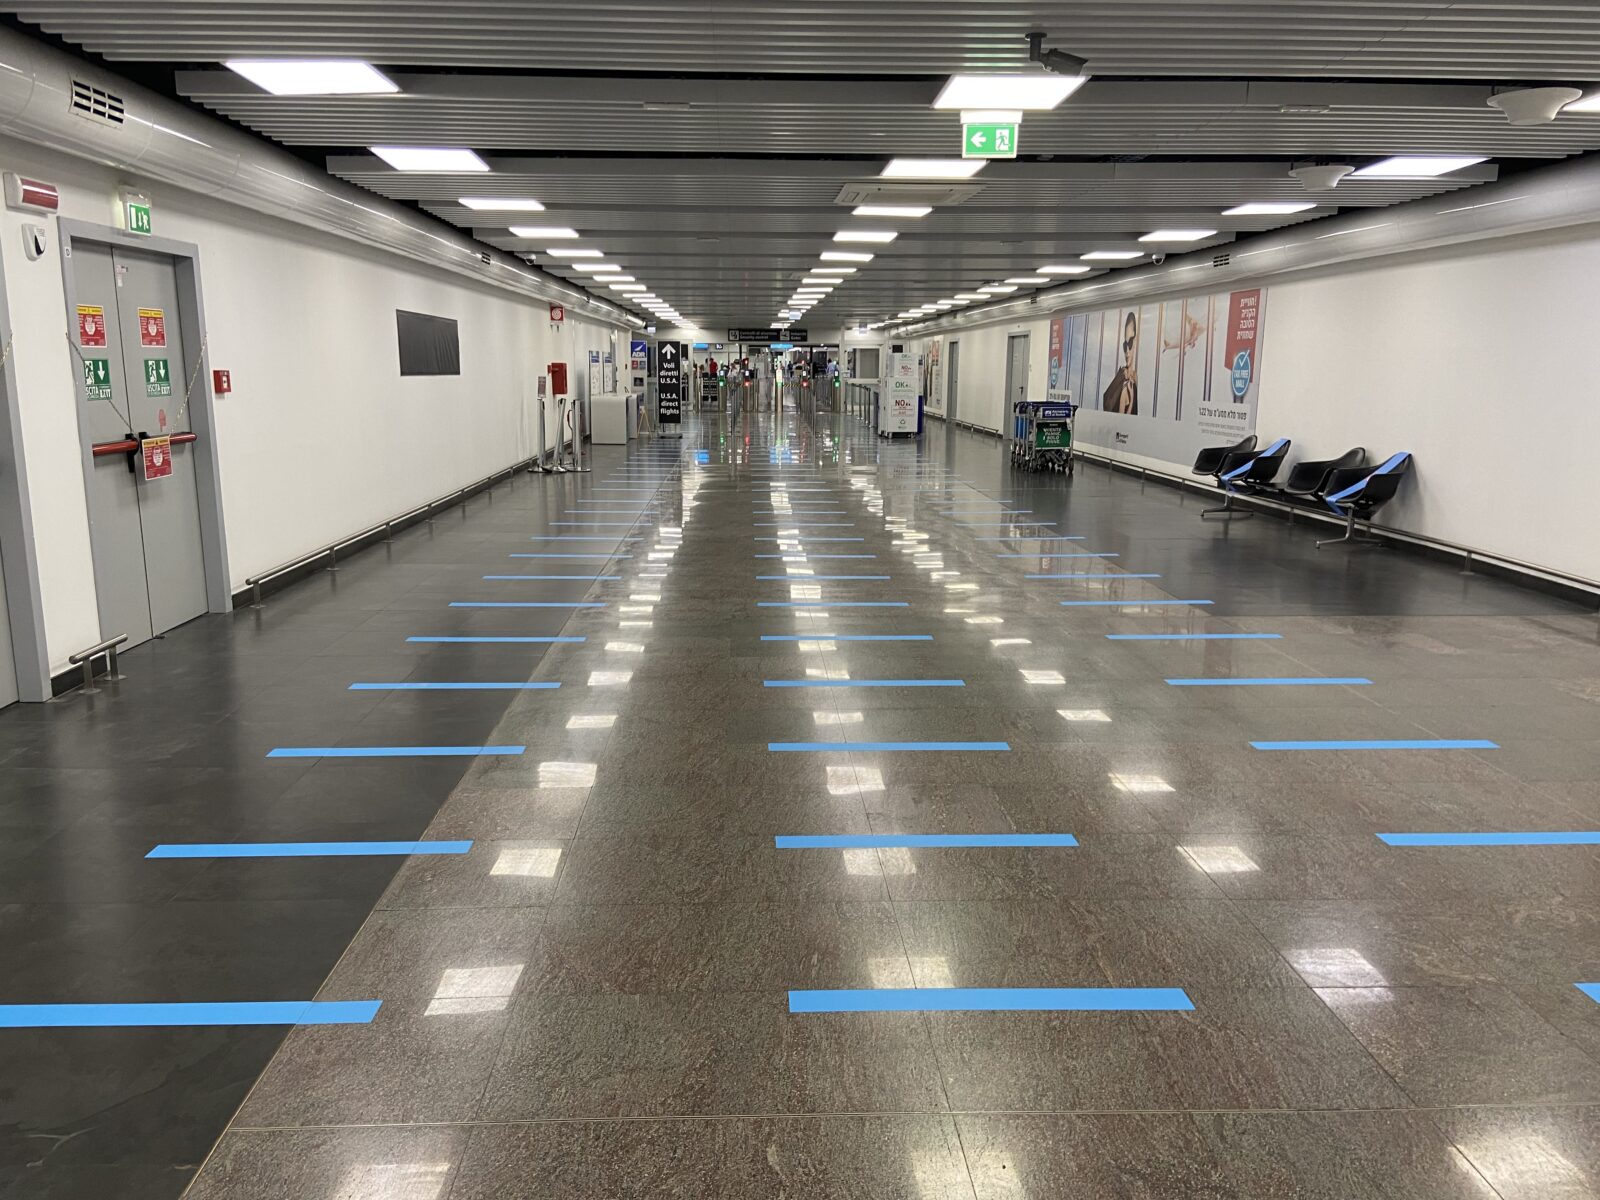 Rome's Fiumicino Airport still has few customers and the few must adhere to regulations.